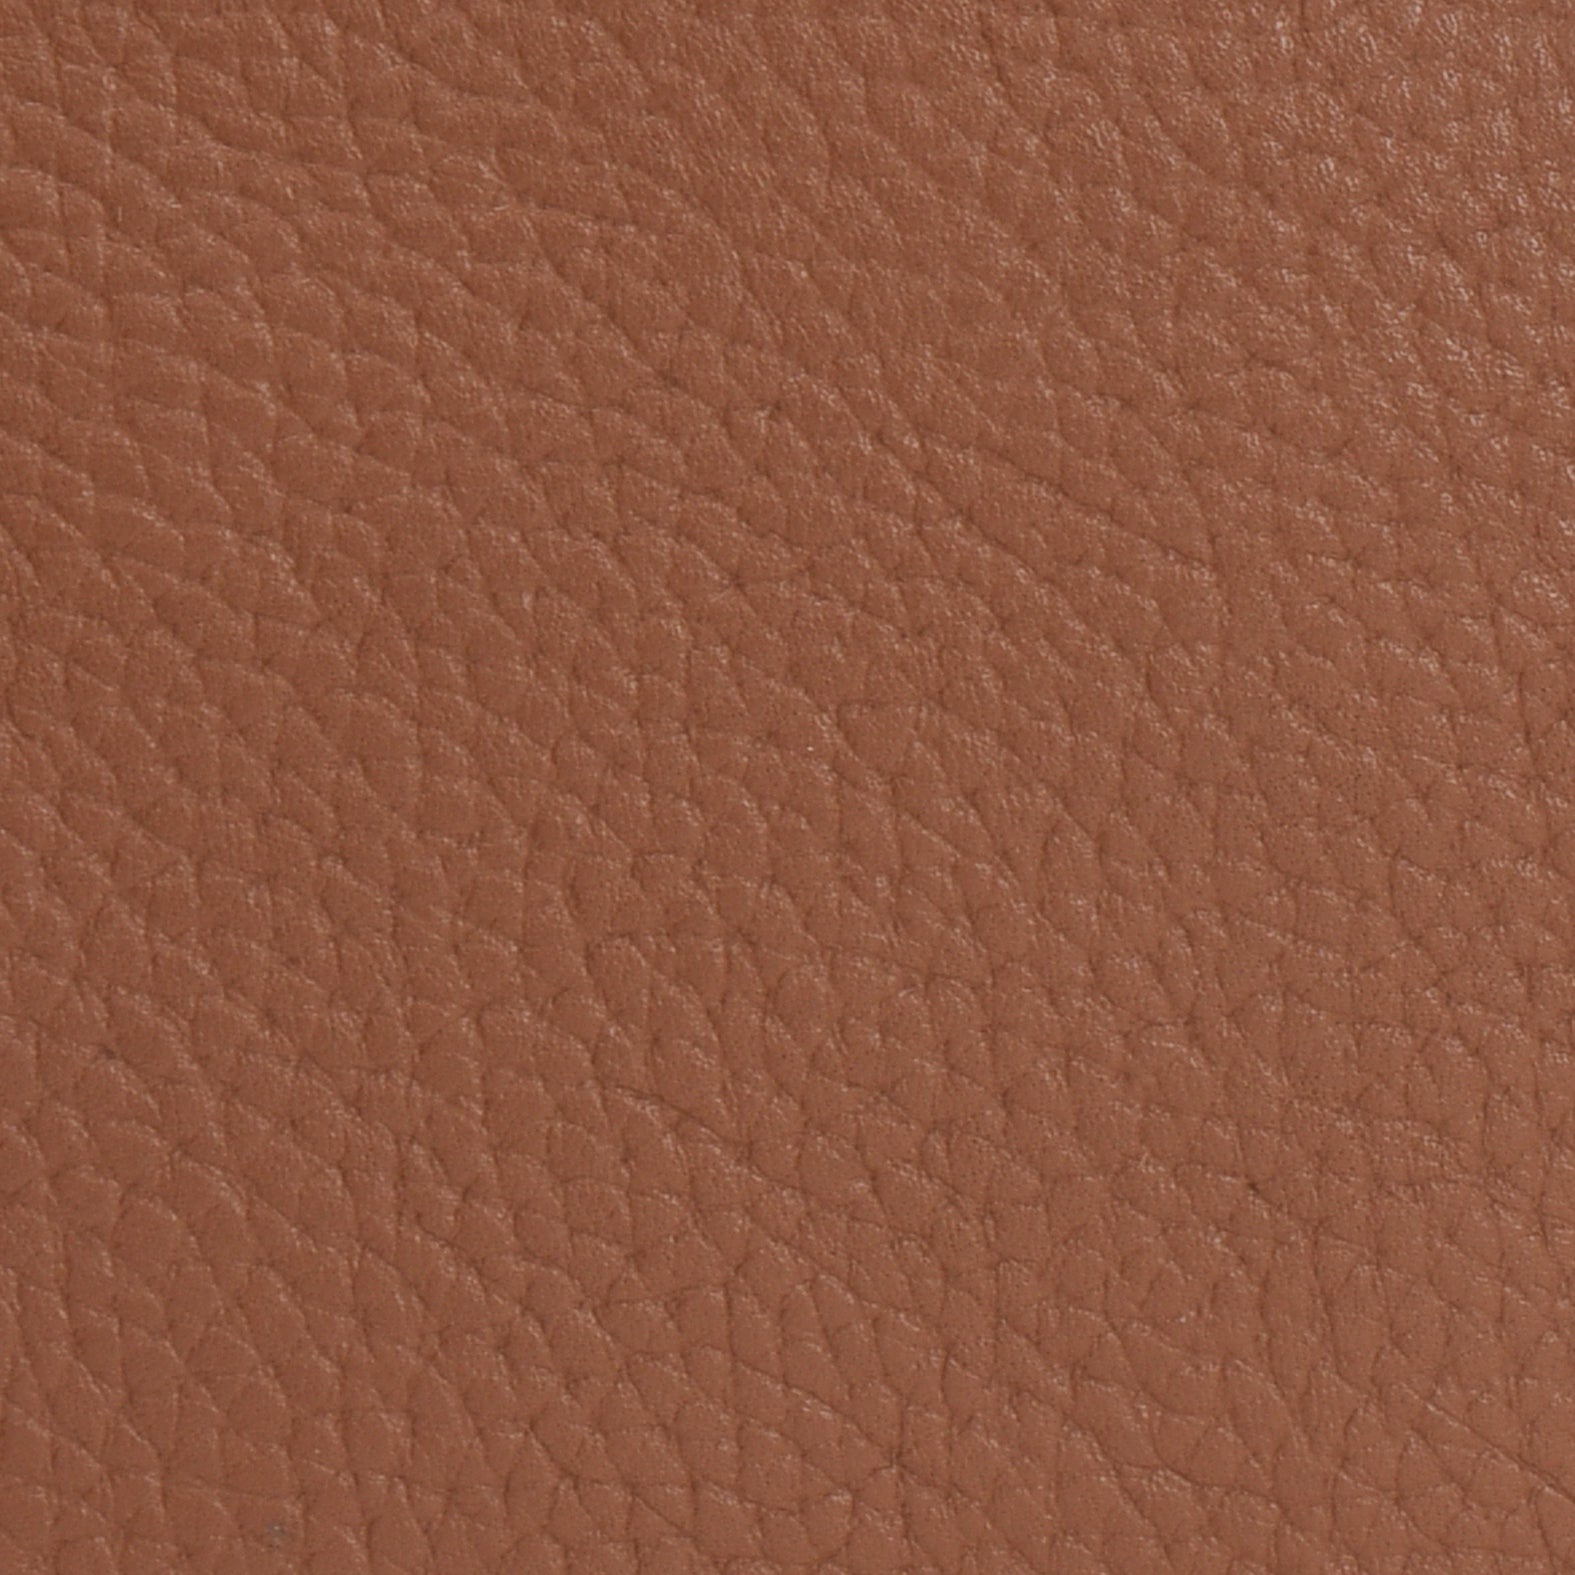 brixbailey-tan-ethical-leather-brand.jpg